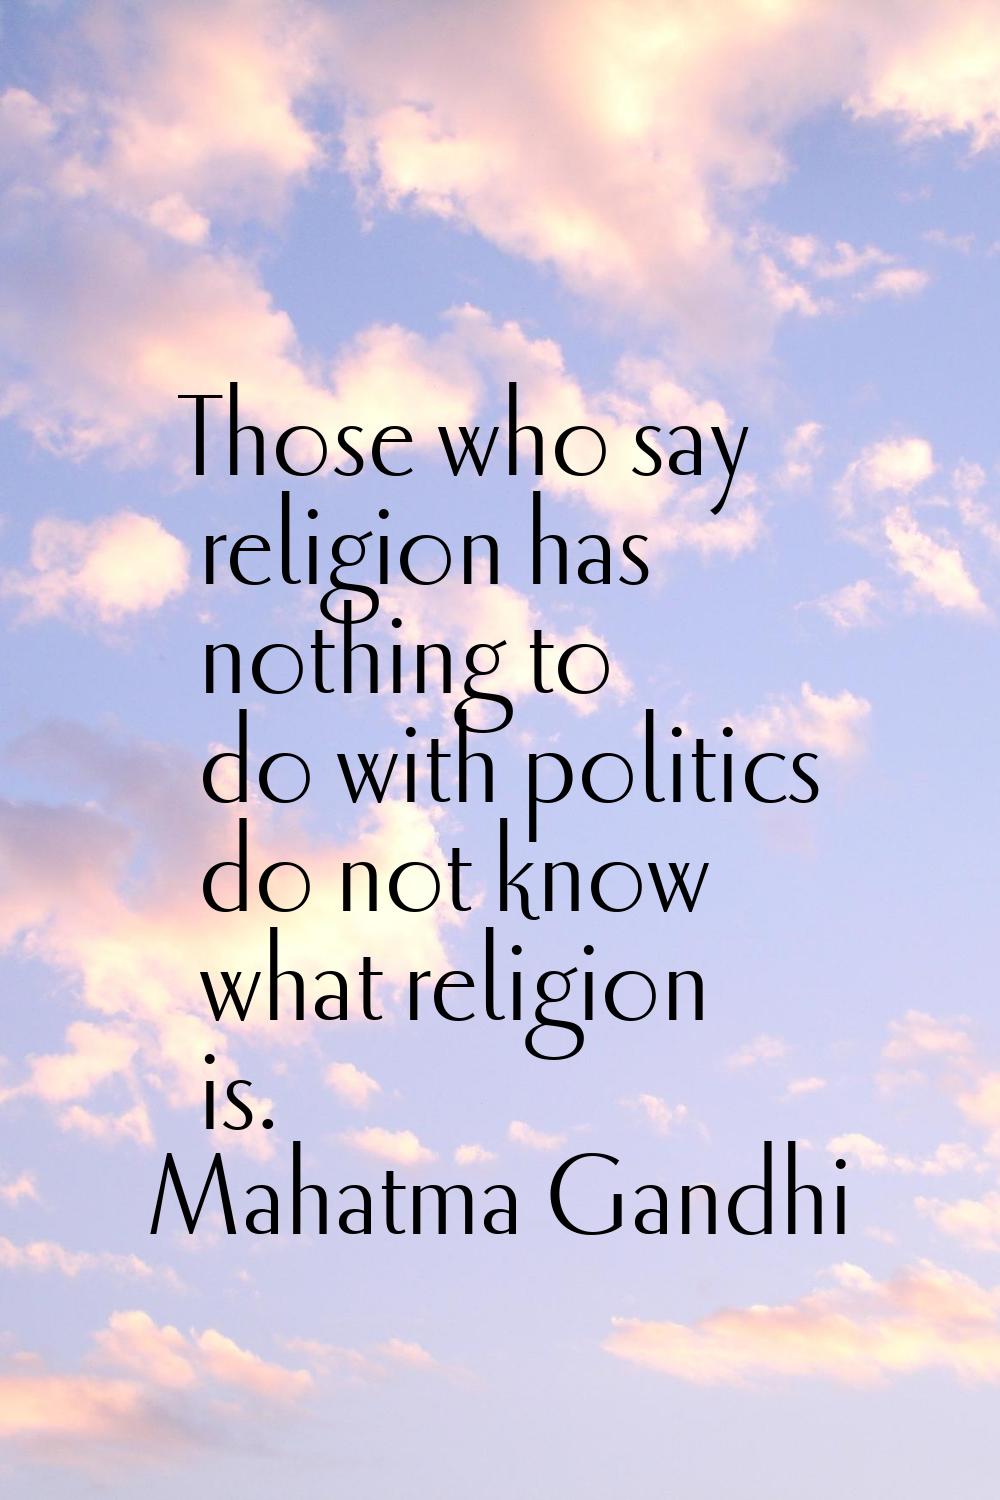 Those who say religion has nothing to do with politics do not know what religion is.